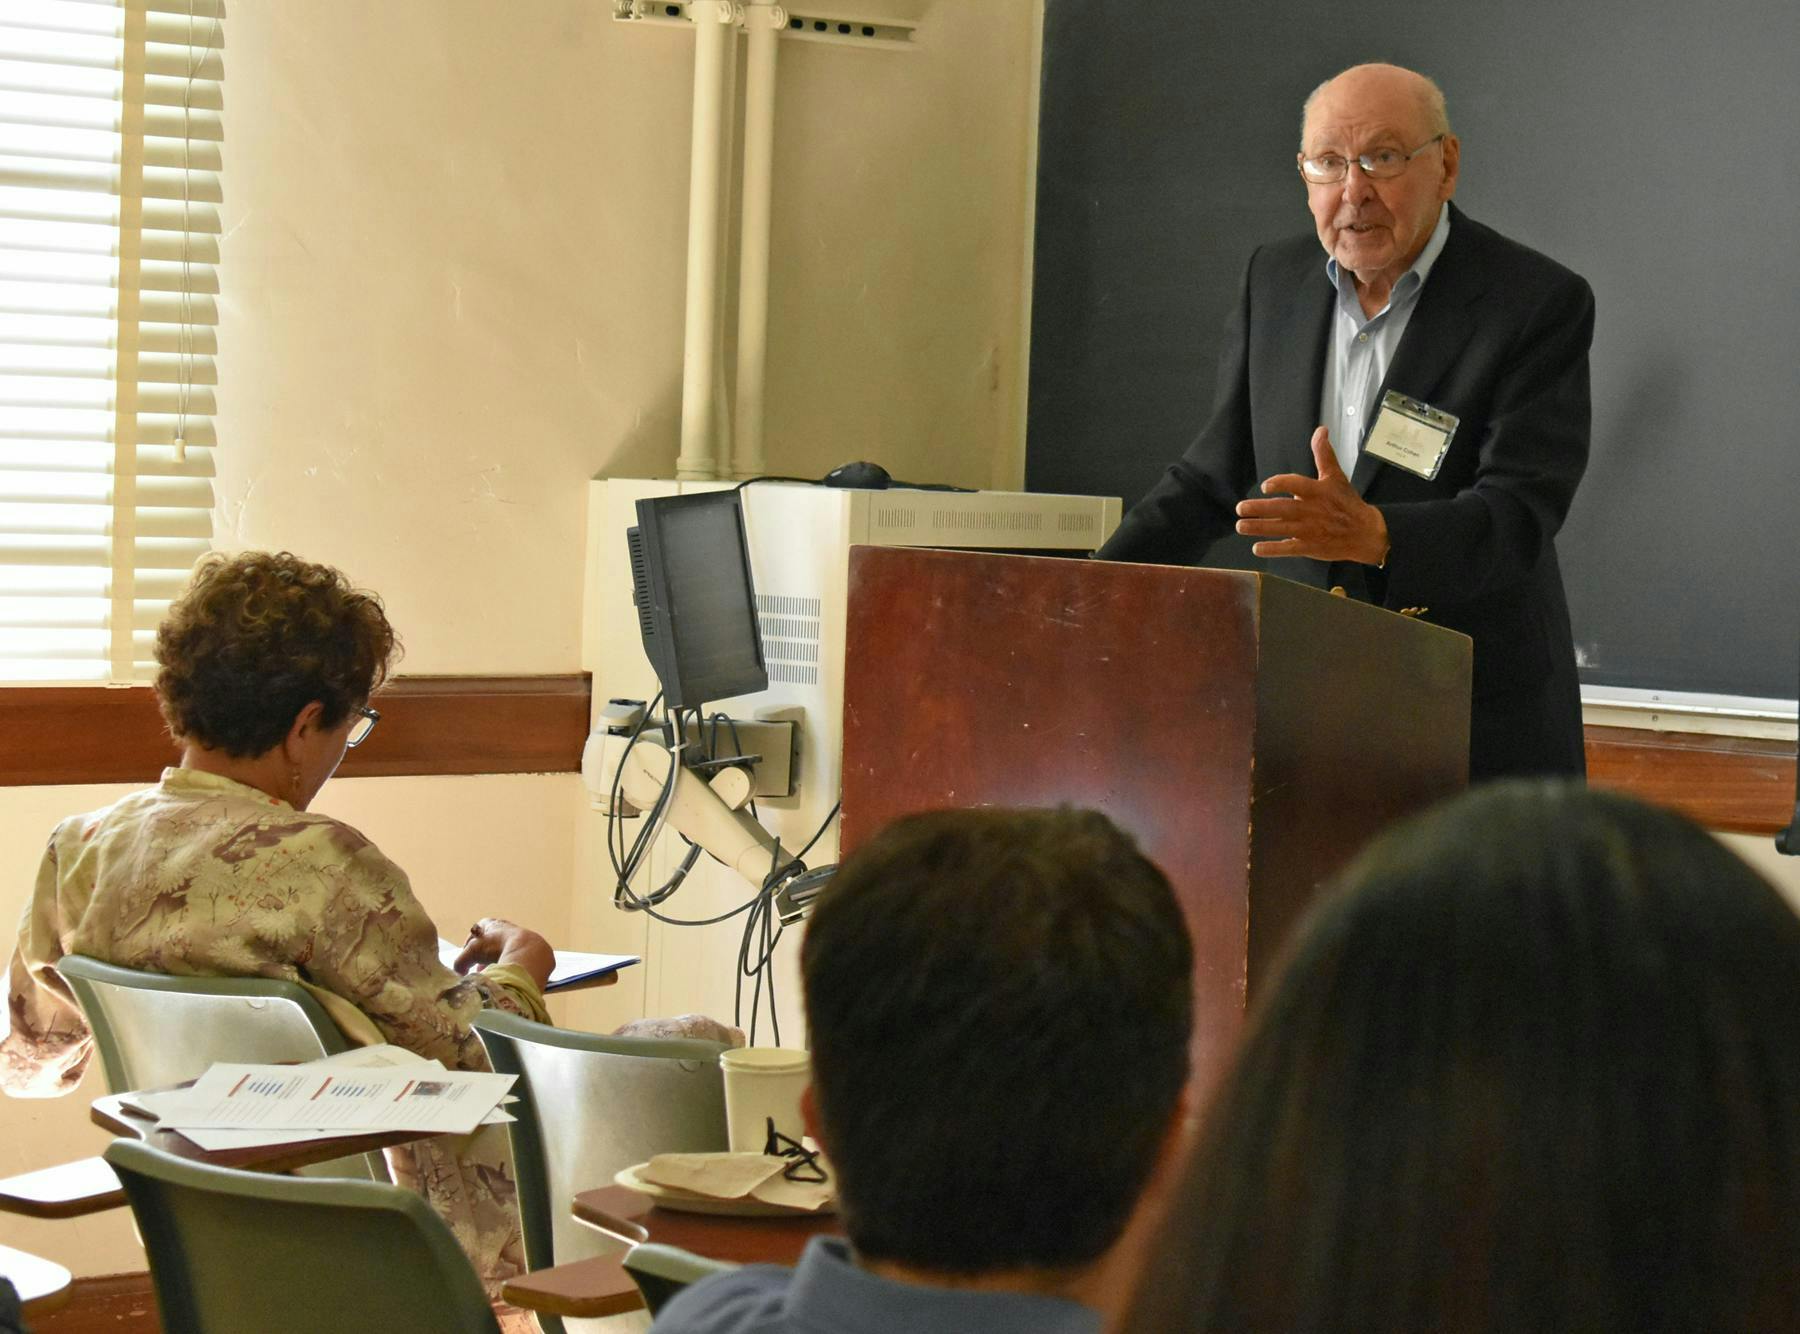 UCLA Emeritus Professor of Education Arthur Cohen shared his decades-long research on the community college. Photo by Joanie Harmon